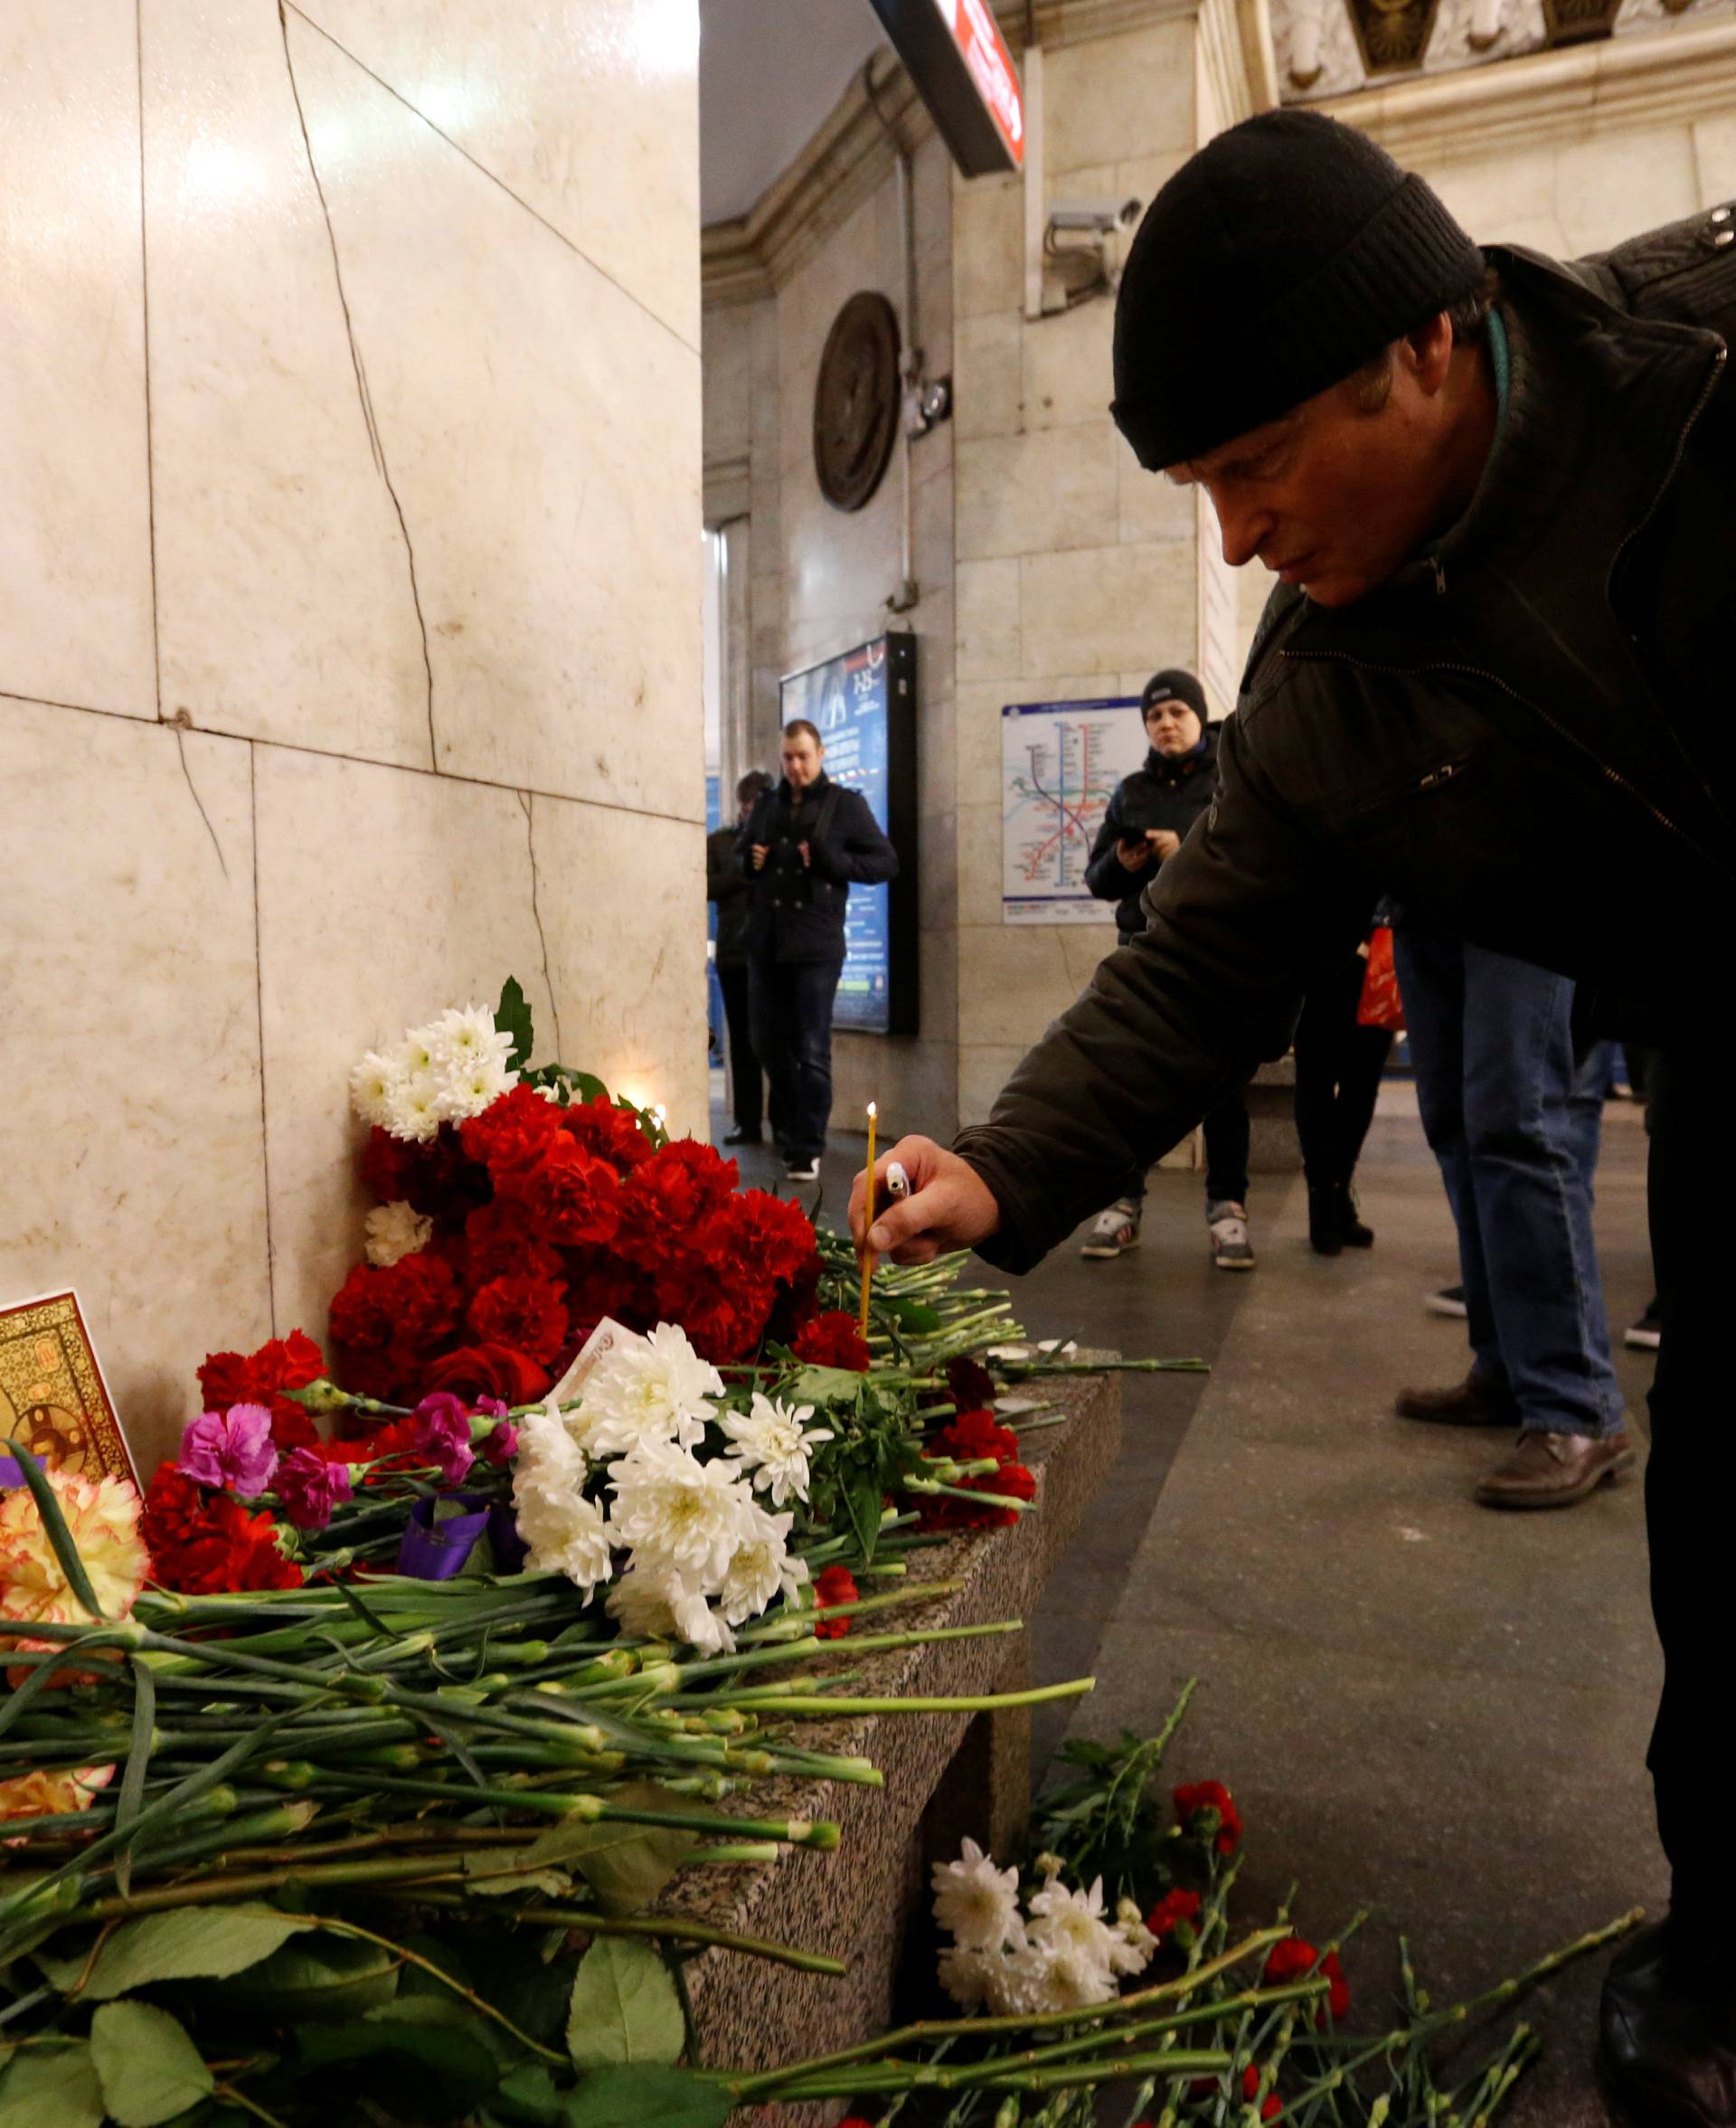 A man leaves a candle in memory of victims of a blast in St.Petersburg metro, at Tekhnologicheskiy institut metro station in St. Petersburg